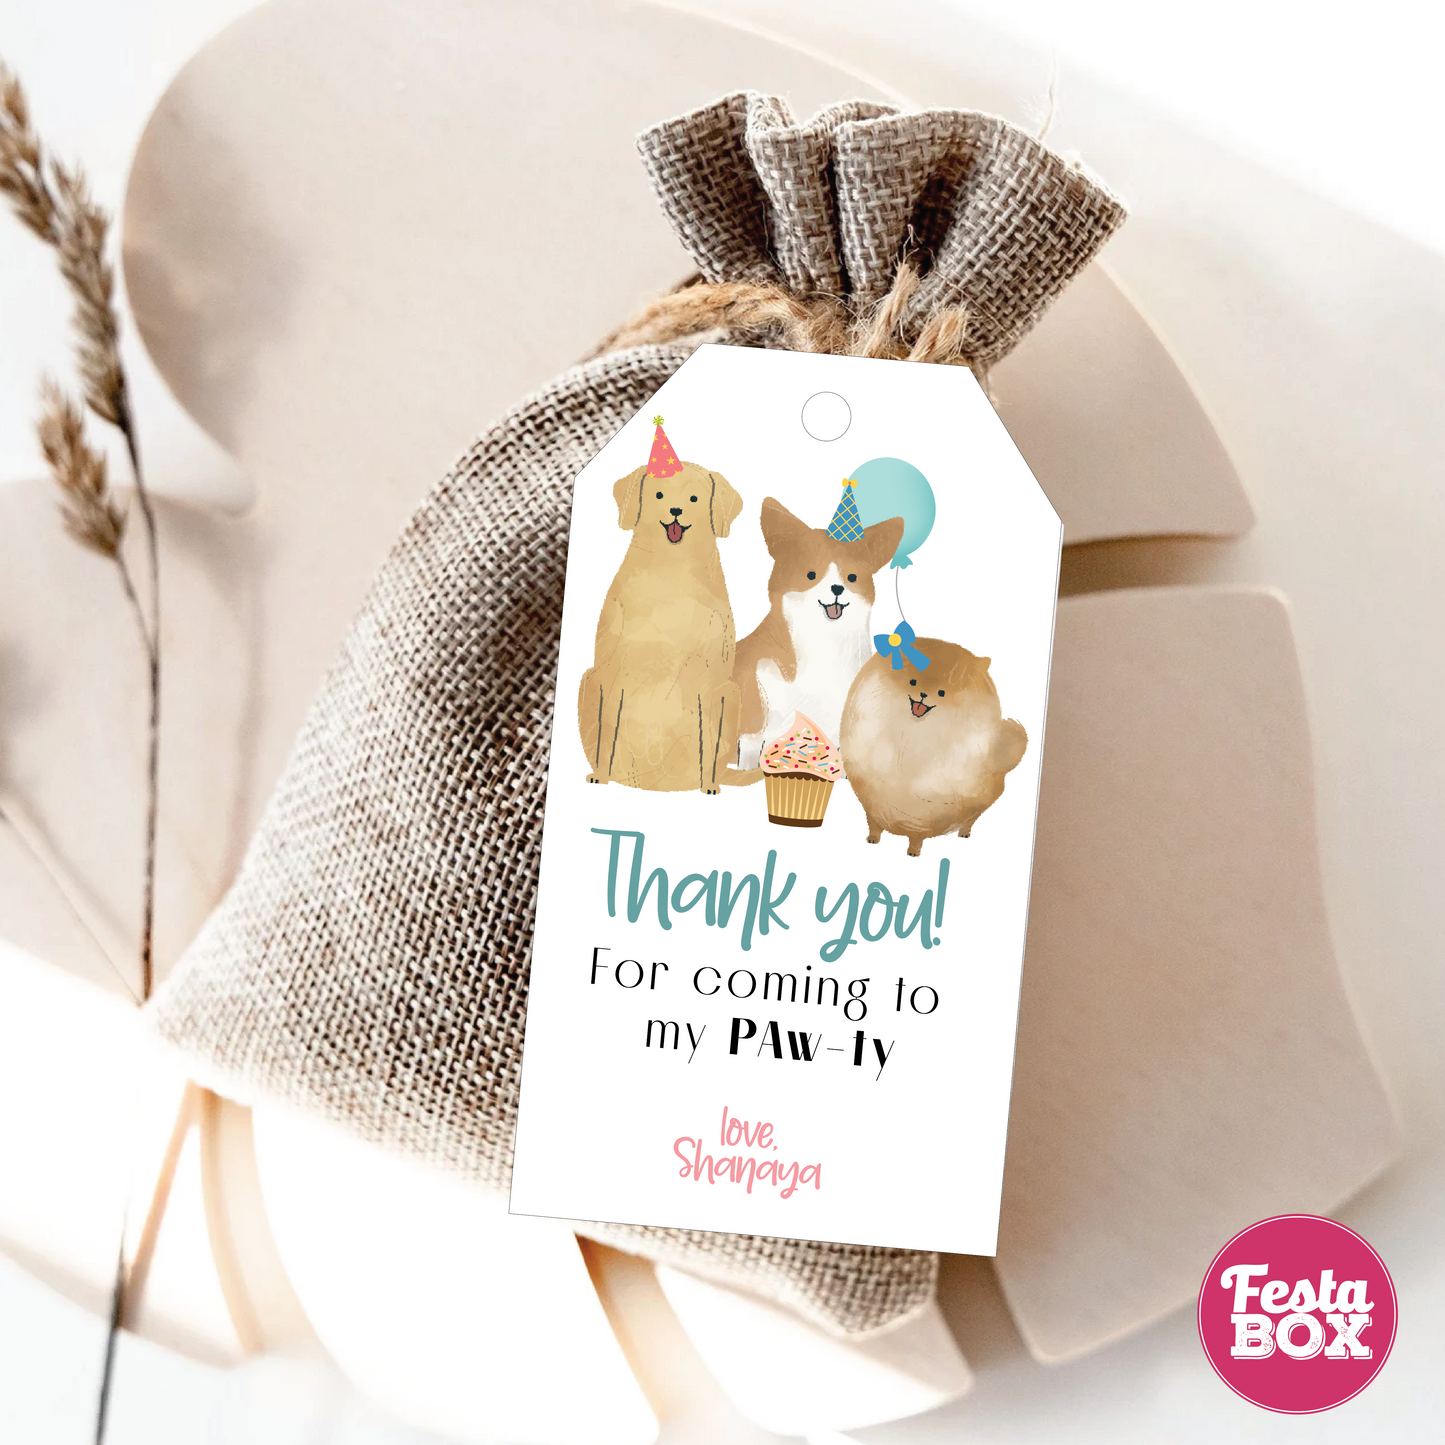 Gift Tags with the Puppy Birthday Party Theme Collection by Festabox